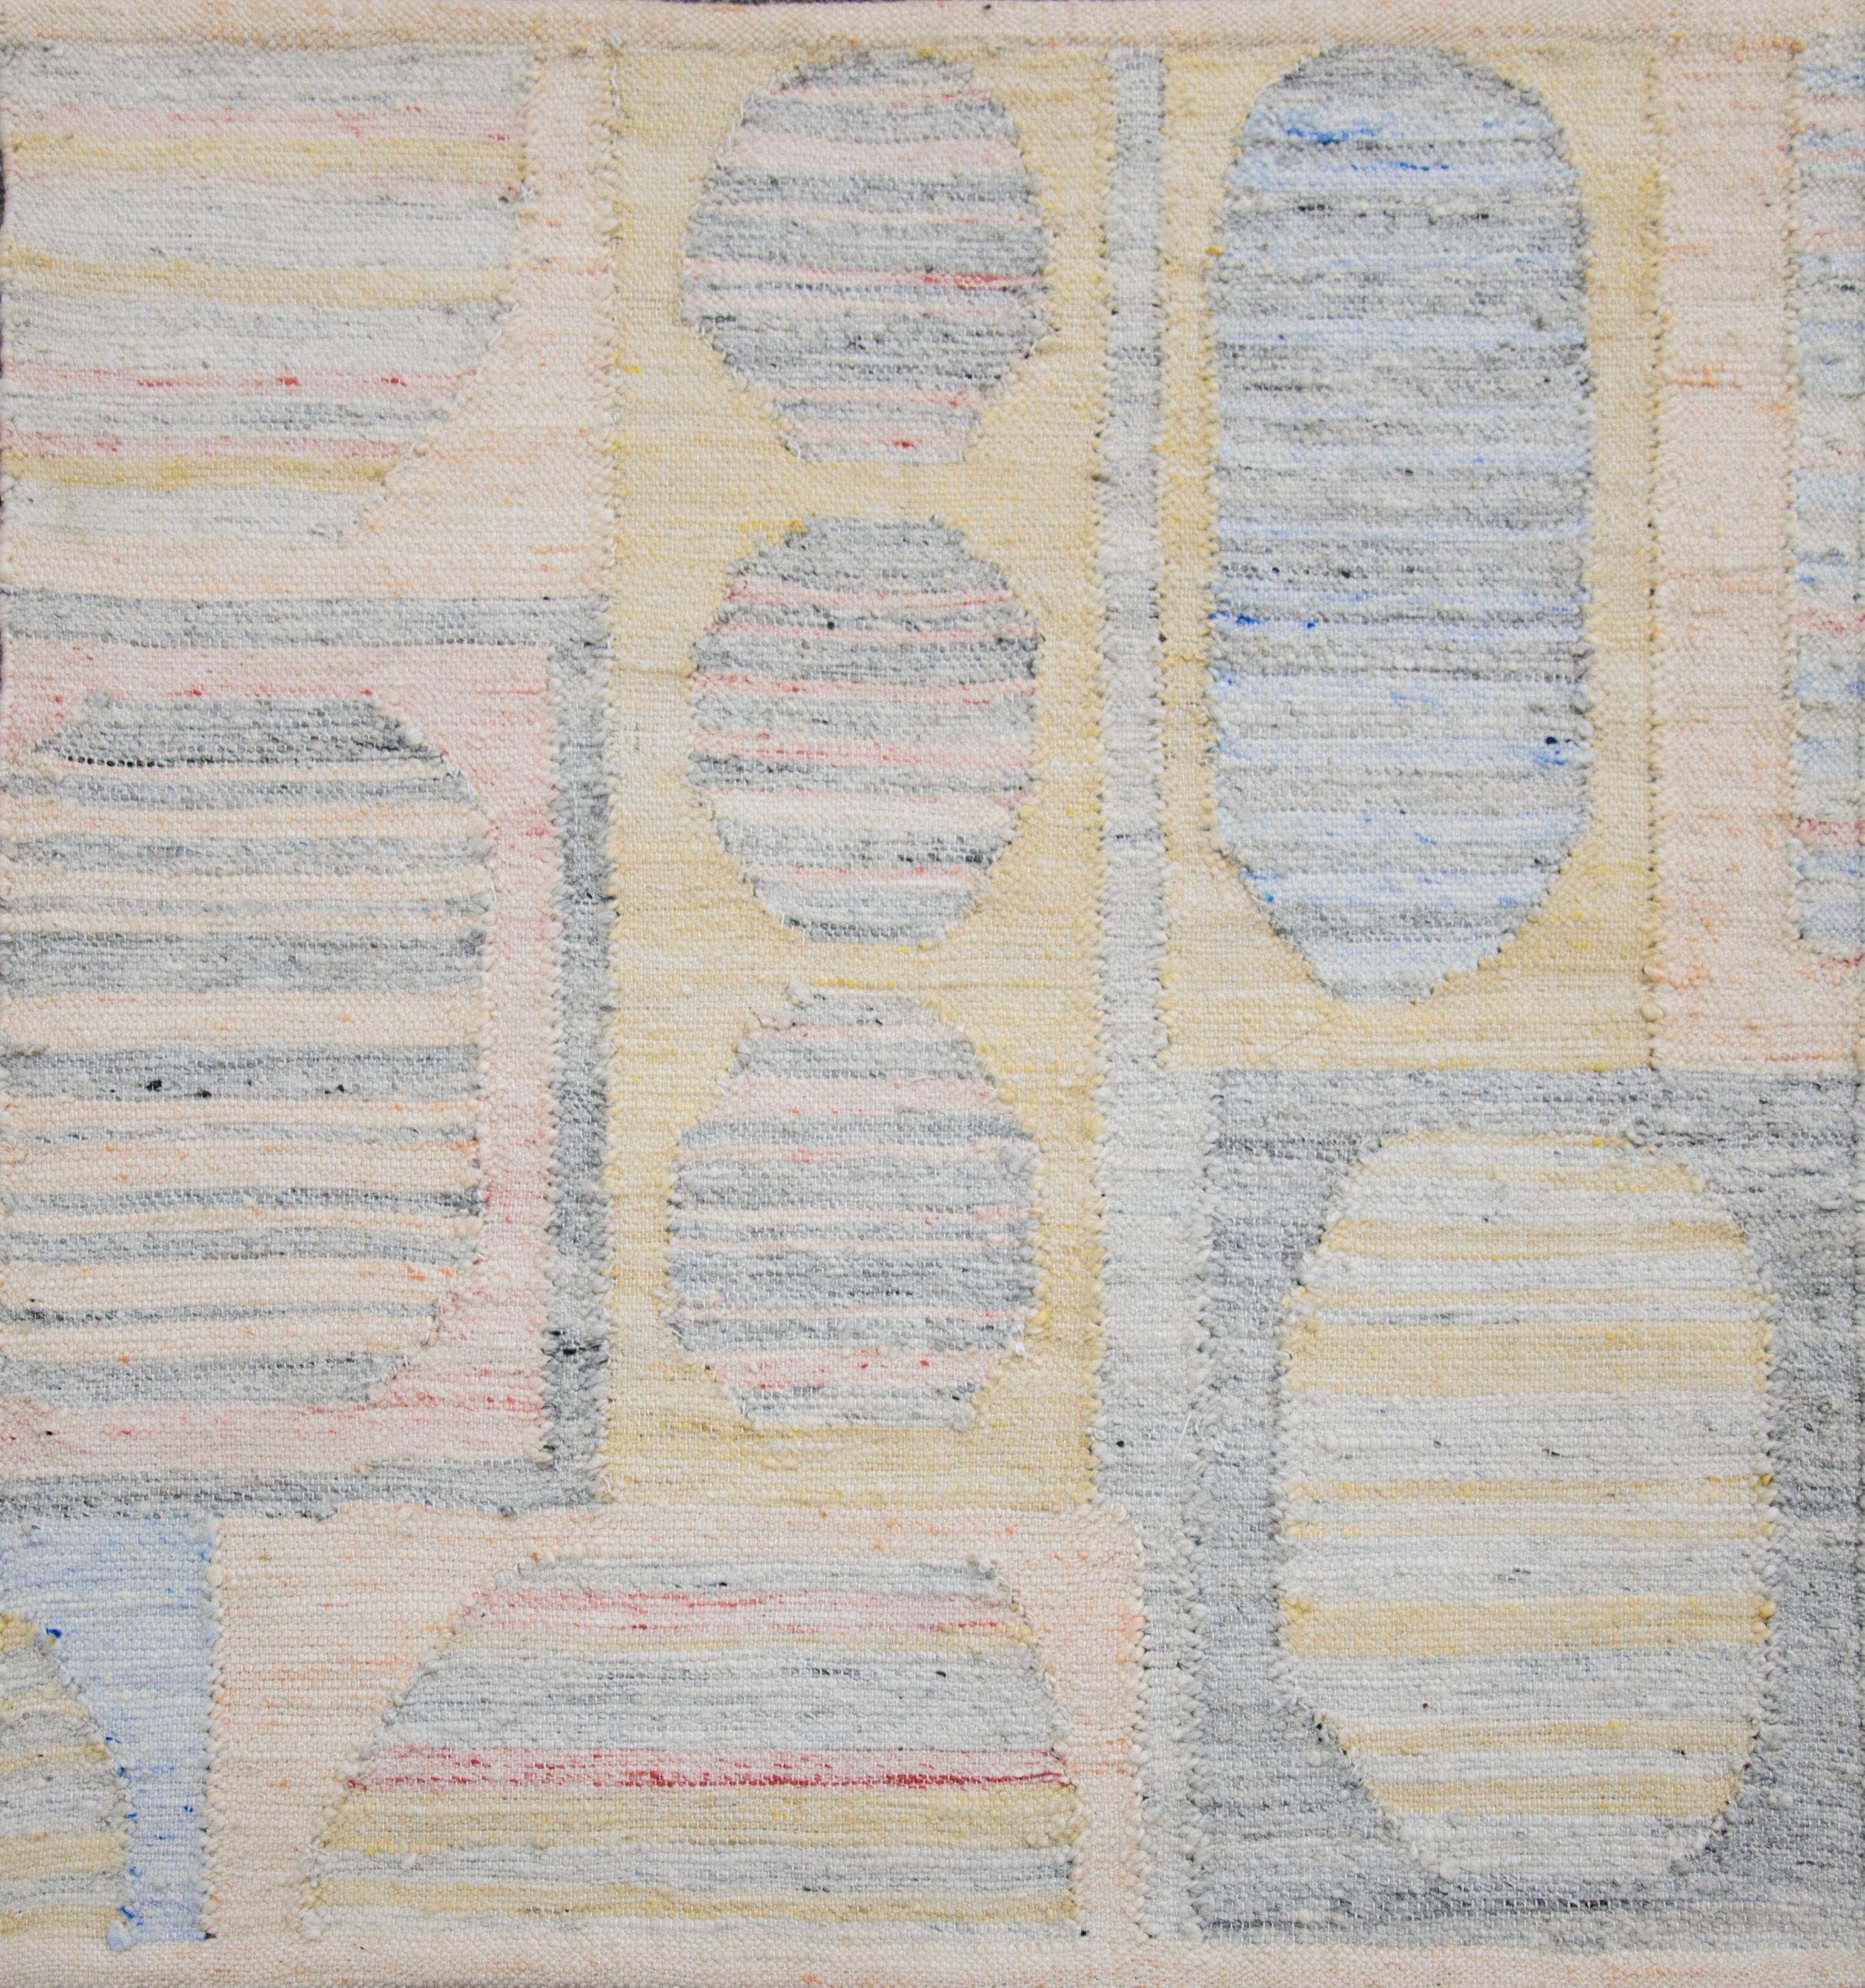 Modern area rug handwoven in Scandinavian design using fine wool and organic dyes. It features an exquisite gray striped field with colorful geometric patterns all-over. This piece will surely look fabulous in modern and contemporary interiors. It